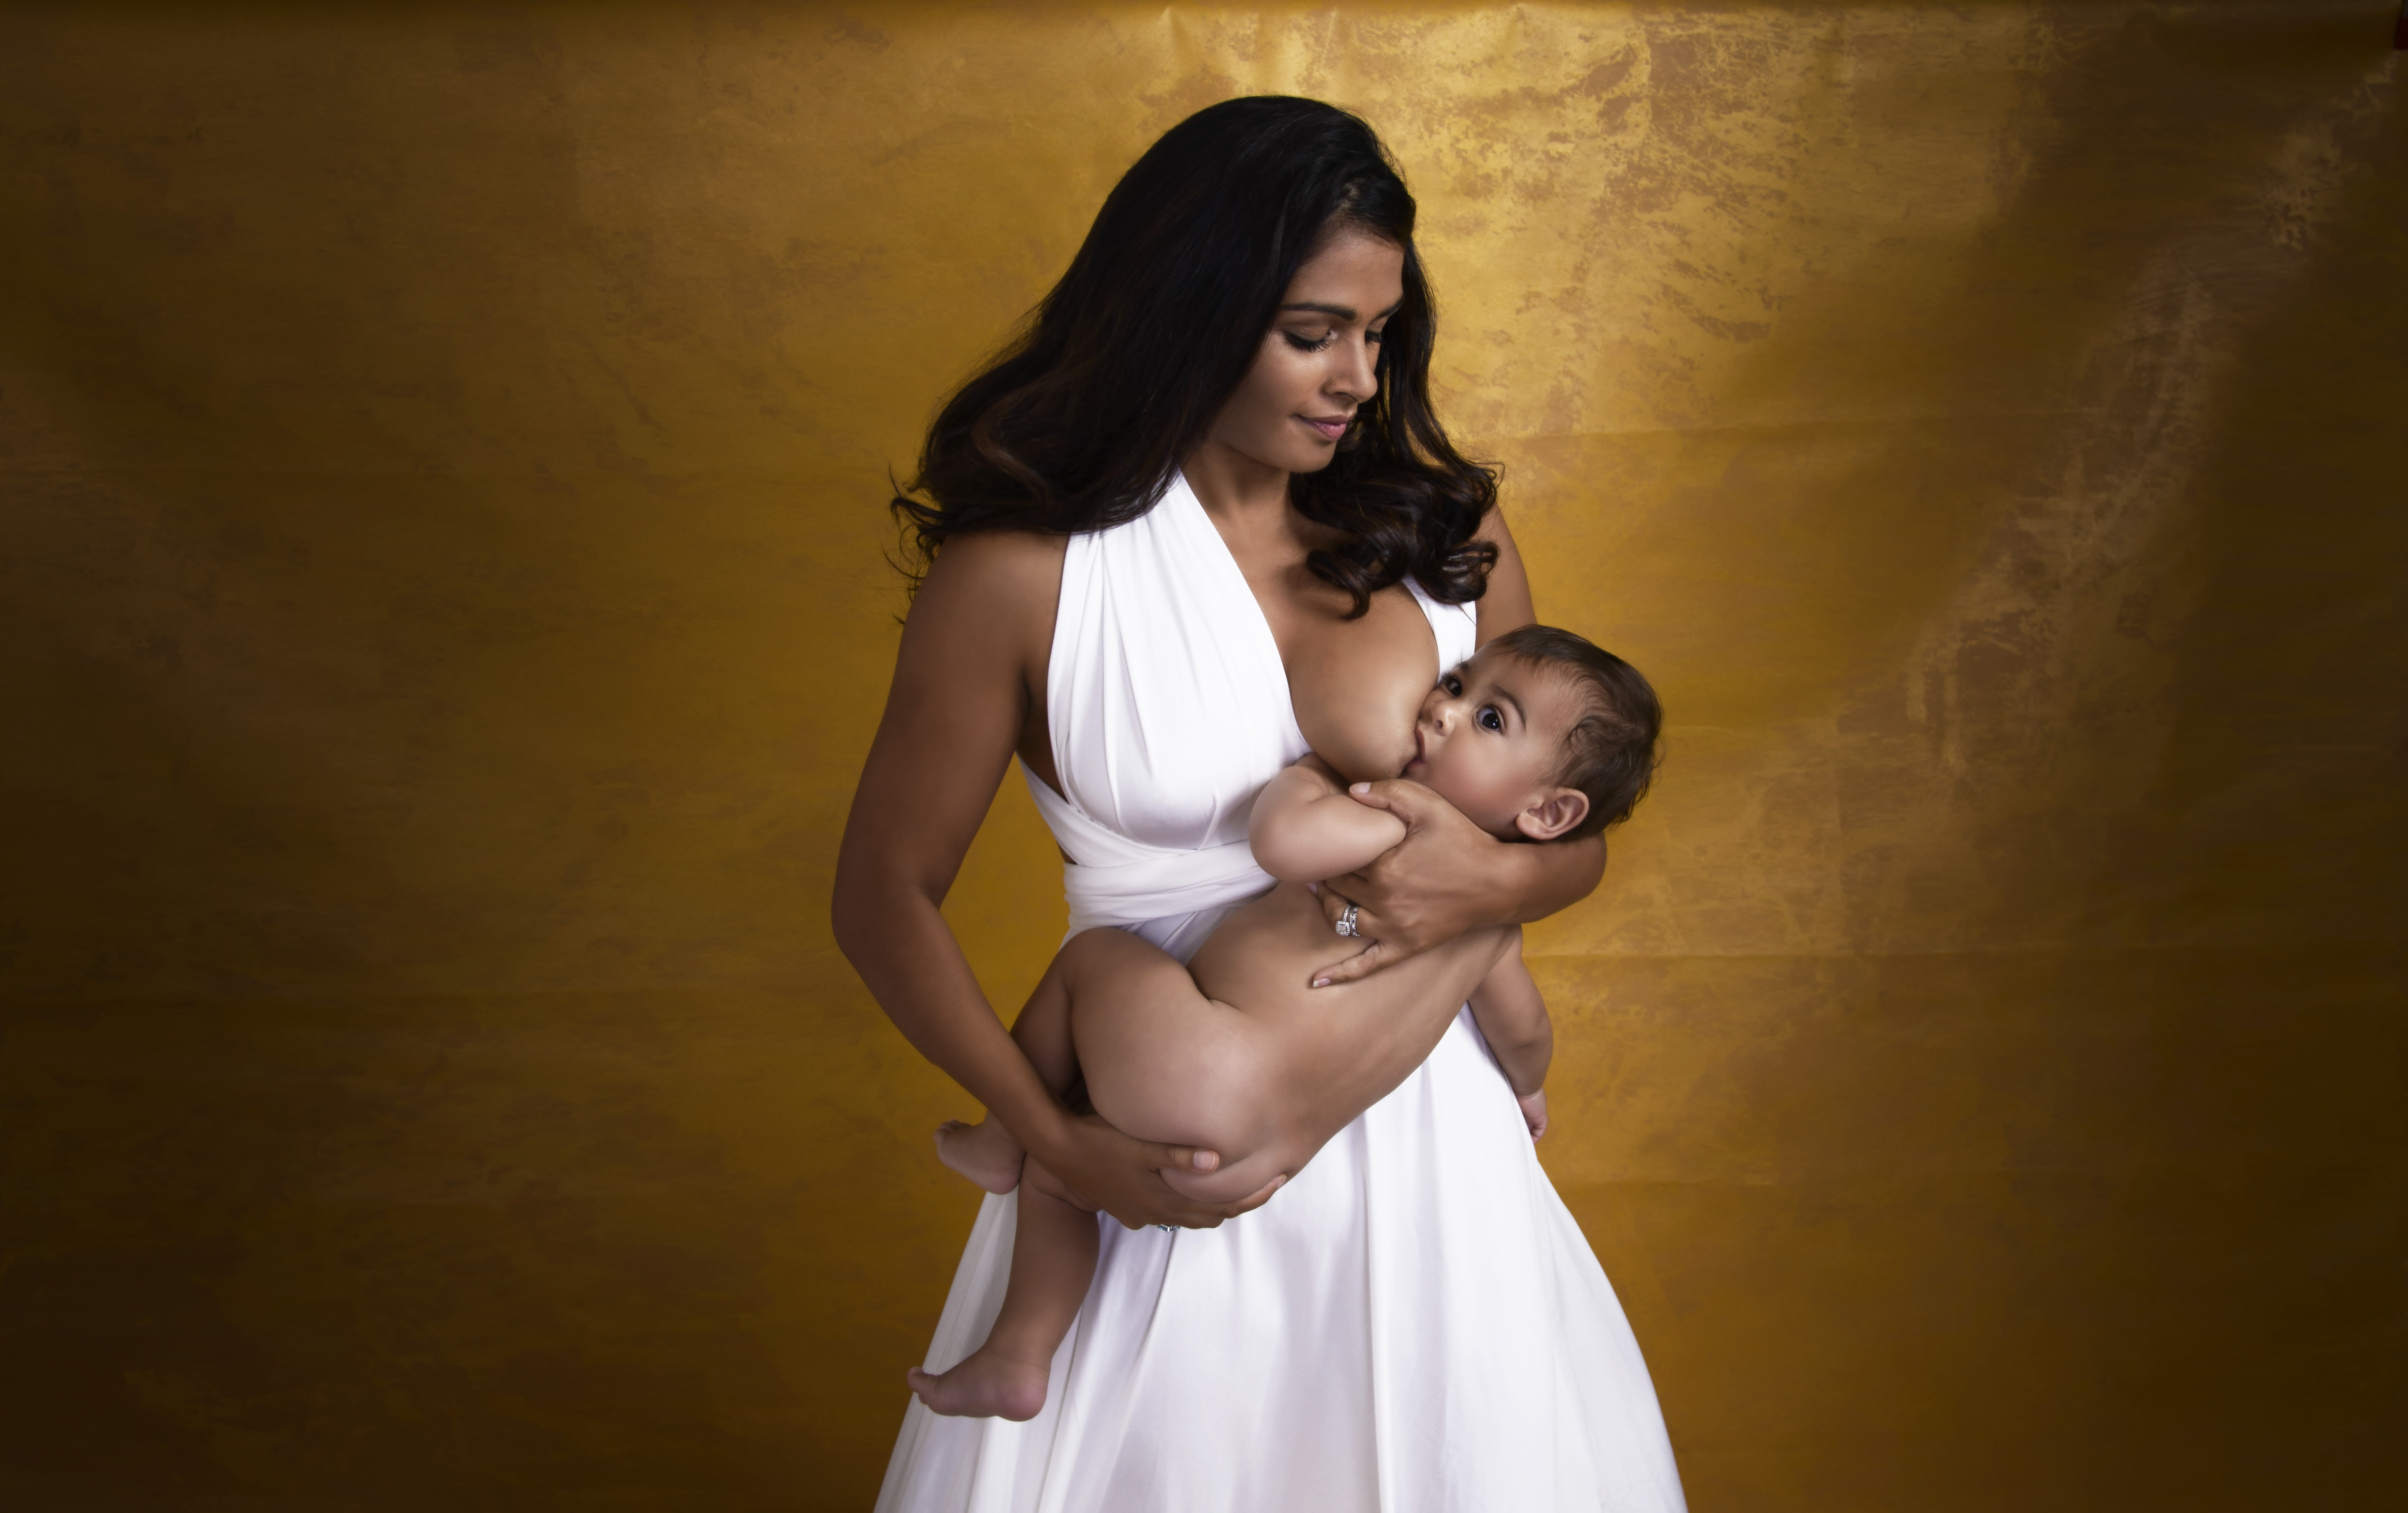 The #Ittasteslikelove campaign aims to normalise breastfeeding in Hong Kong, where 40 per cent of women who nurse in public say they experience negative reactions to it. The photo shoot was done as part of the campaign. Photo: Eva Thieulle (Eva Portraits)